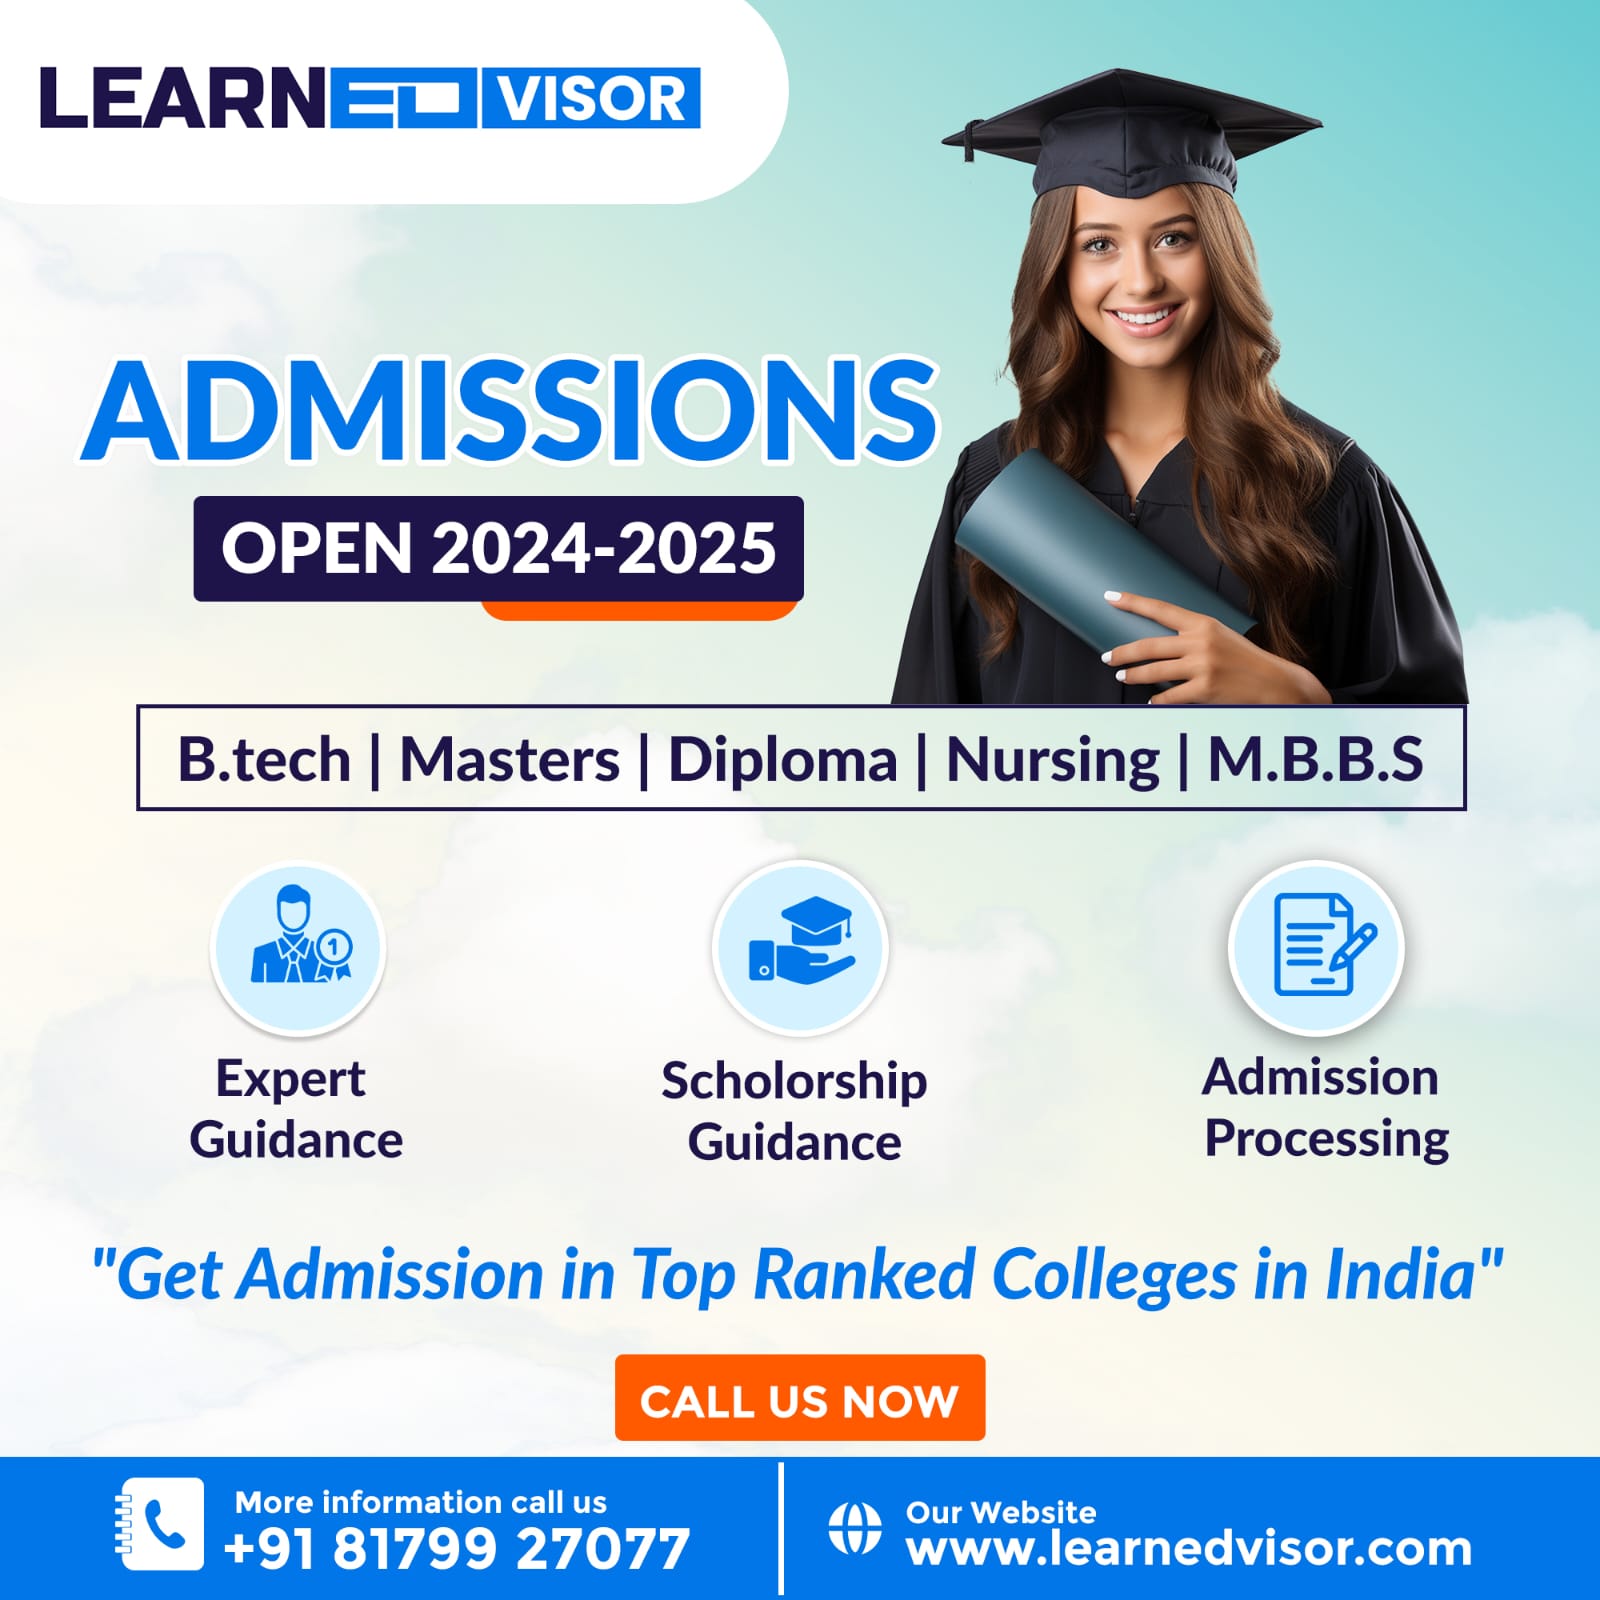  Get admission in preferred colleges  || EDUCTIONAL CONSULTANCY || LearnEdvisor